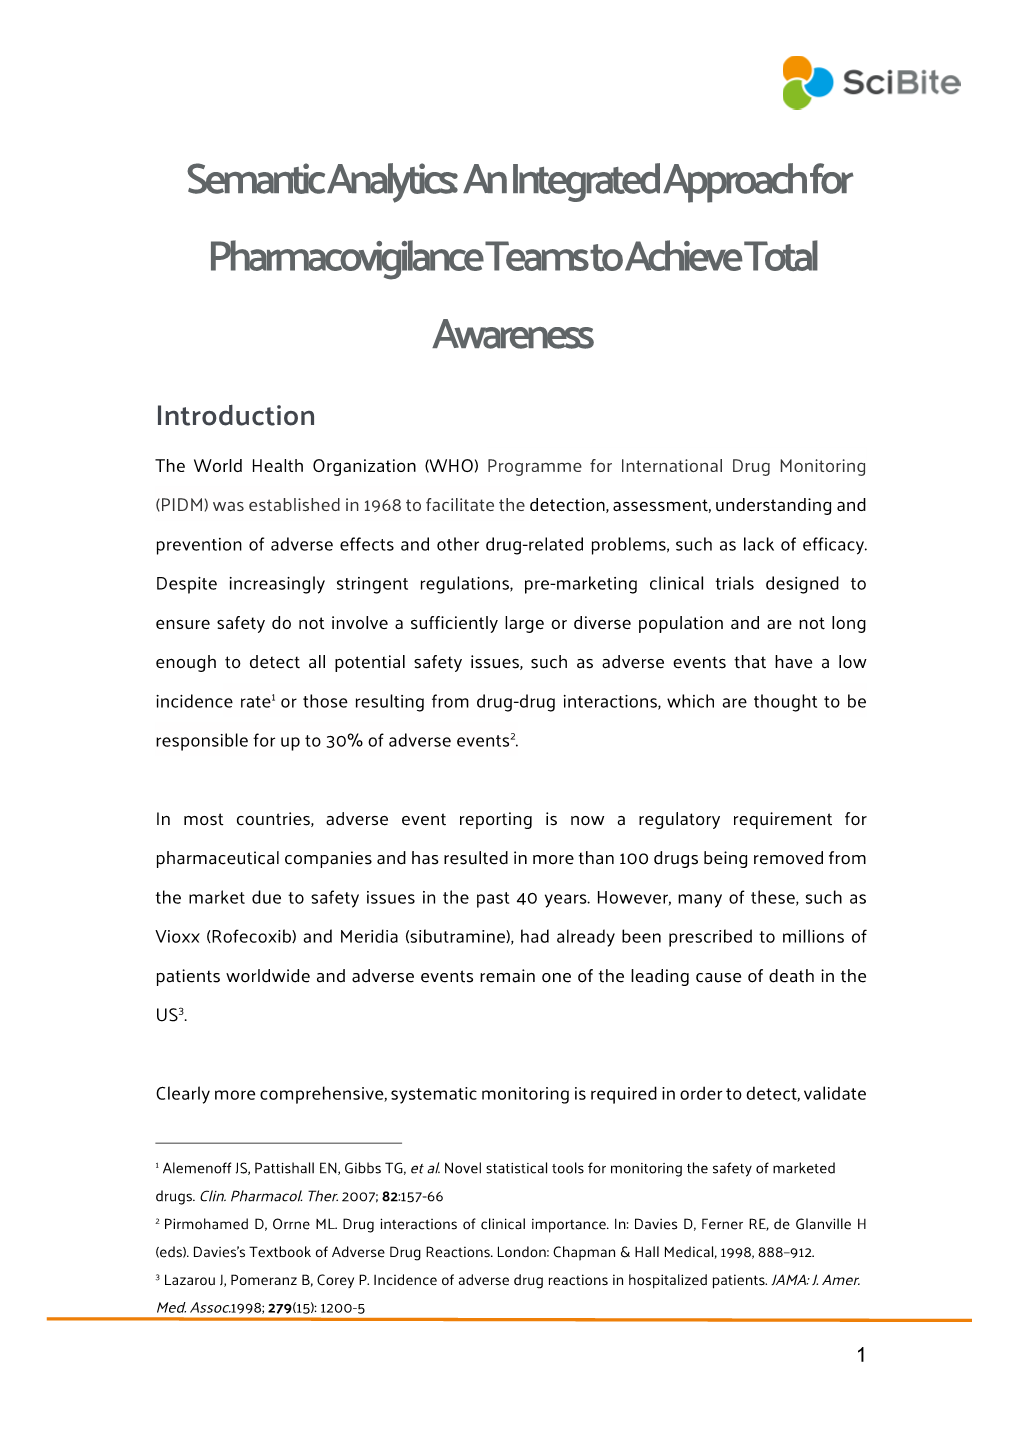 Semantic Analytics: an Integrated Approach for Pharmacovigilance Teams to Achieve Total Awareness